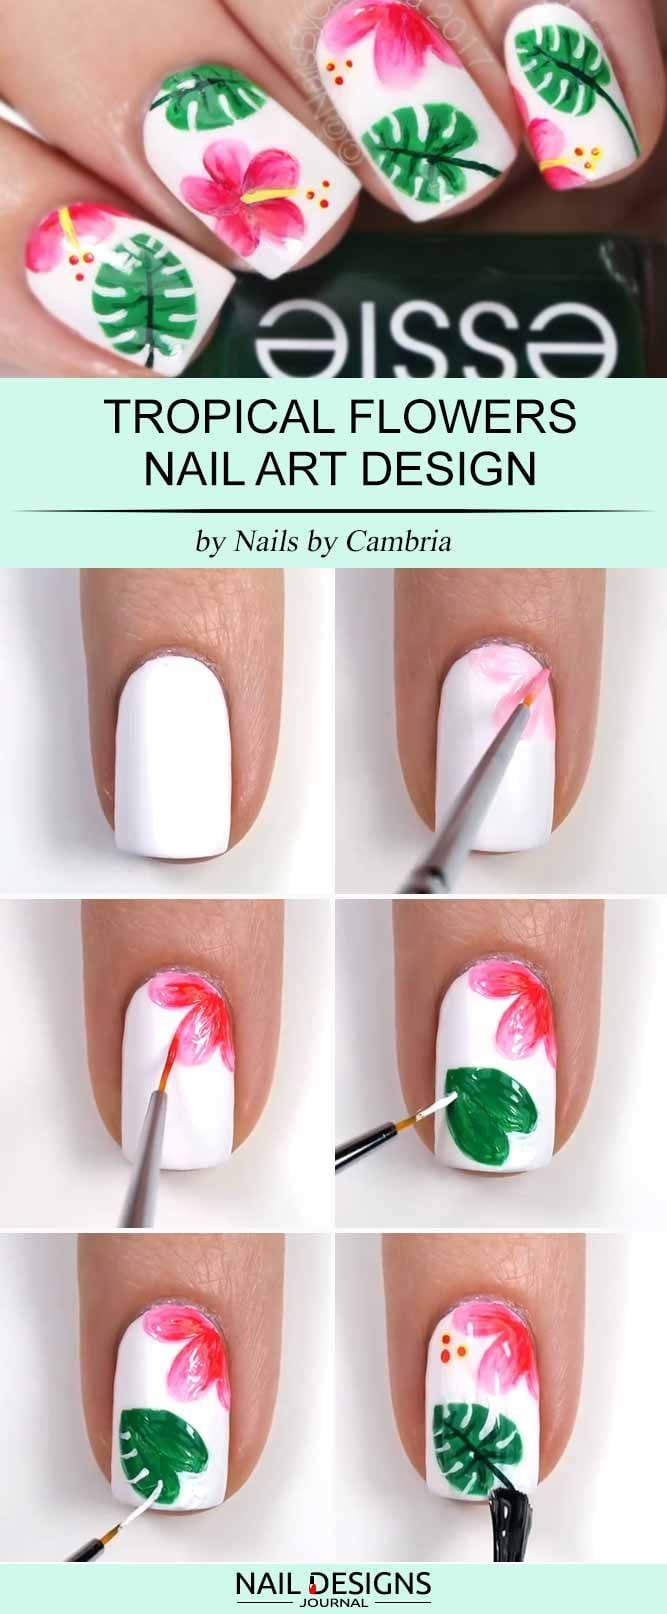 [ad_1]

Cute And Easy Nail Designs to Do at Home ★ See more: naildesignsjourna… #nails
Source by aimeofficial
[ad_2]
			
			…